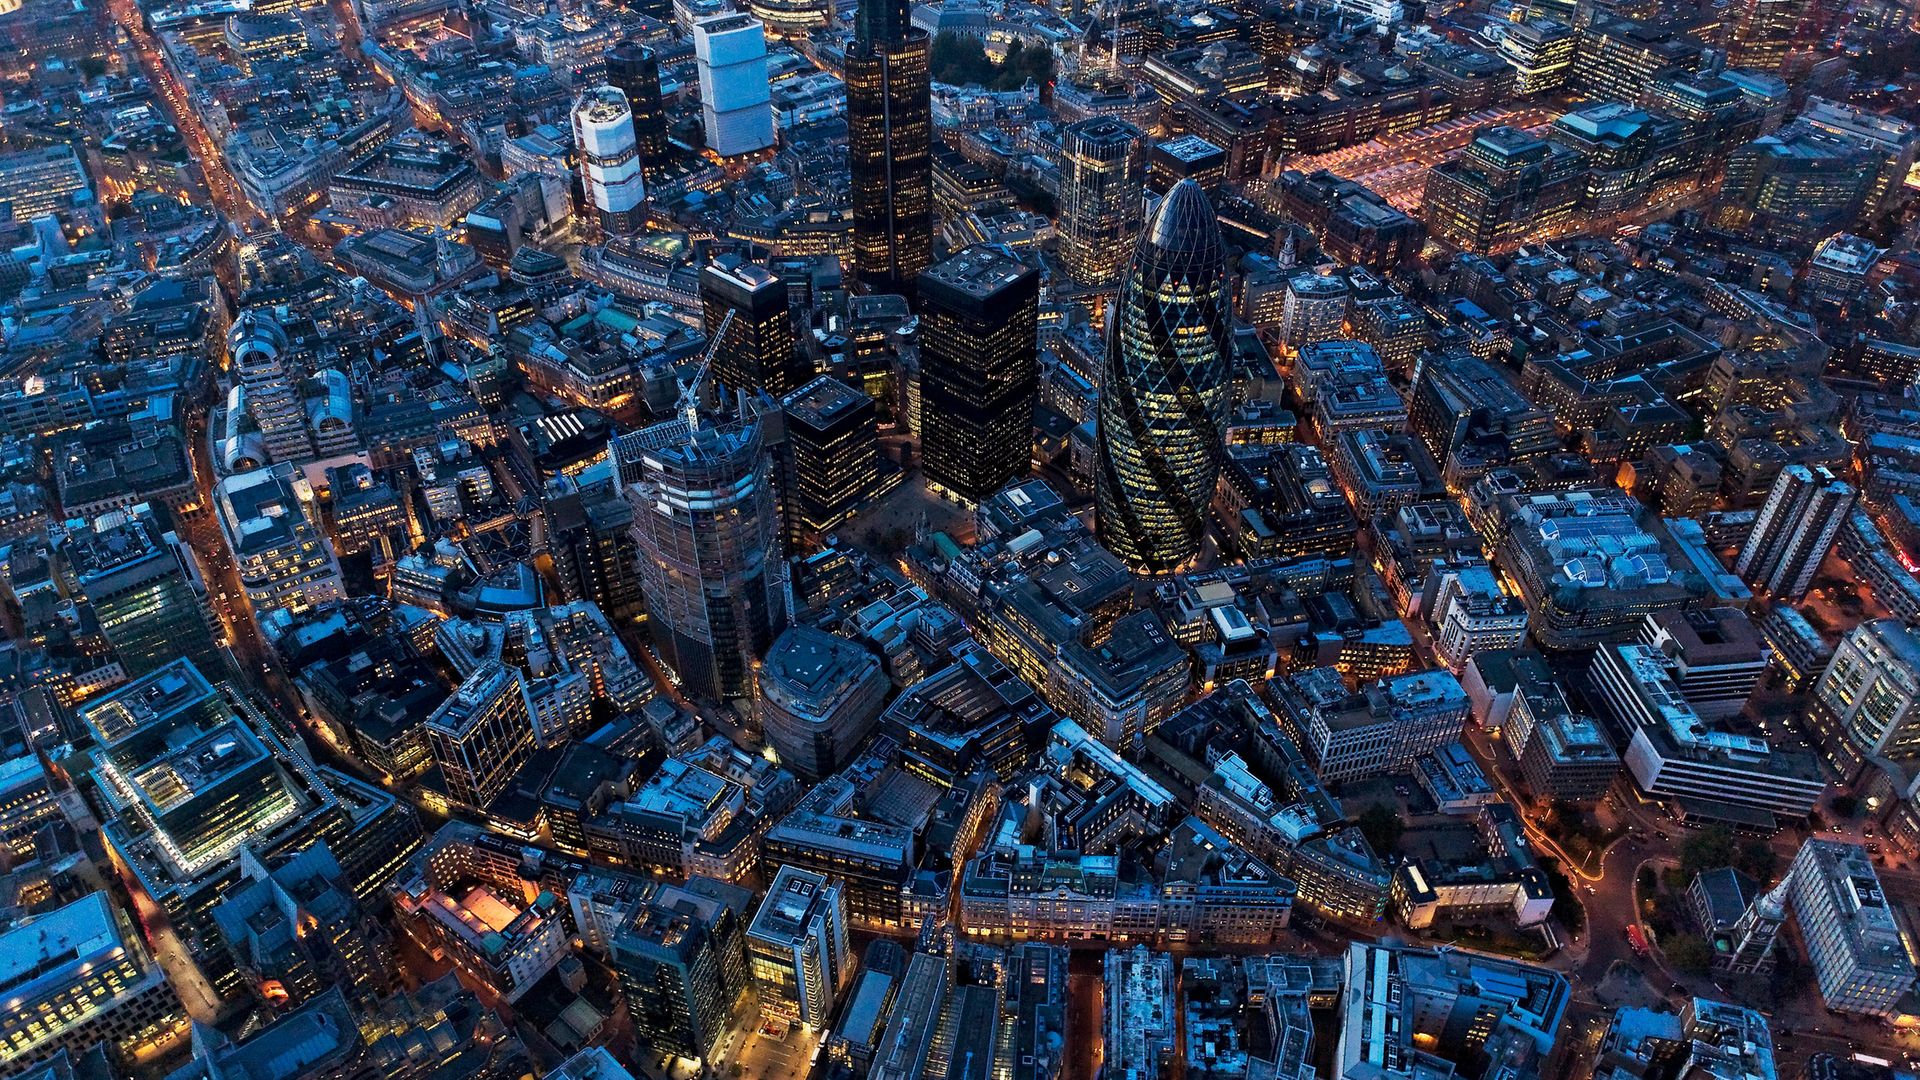 An aerial view of City of London at Night, UK - Credit: Getty Images